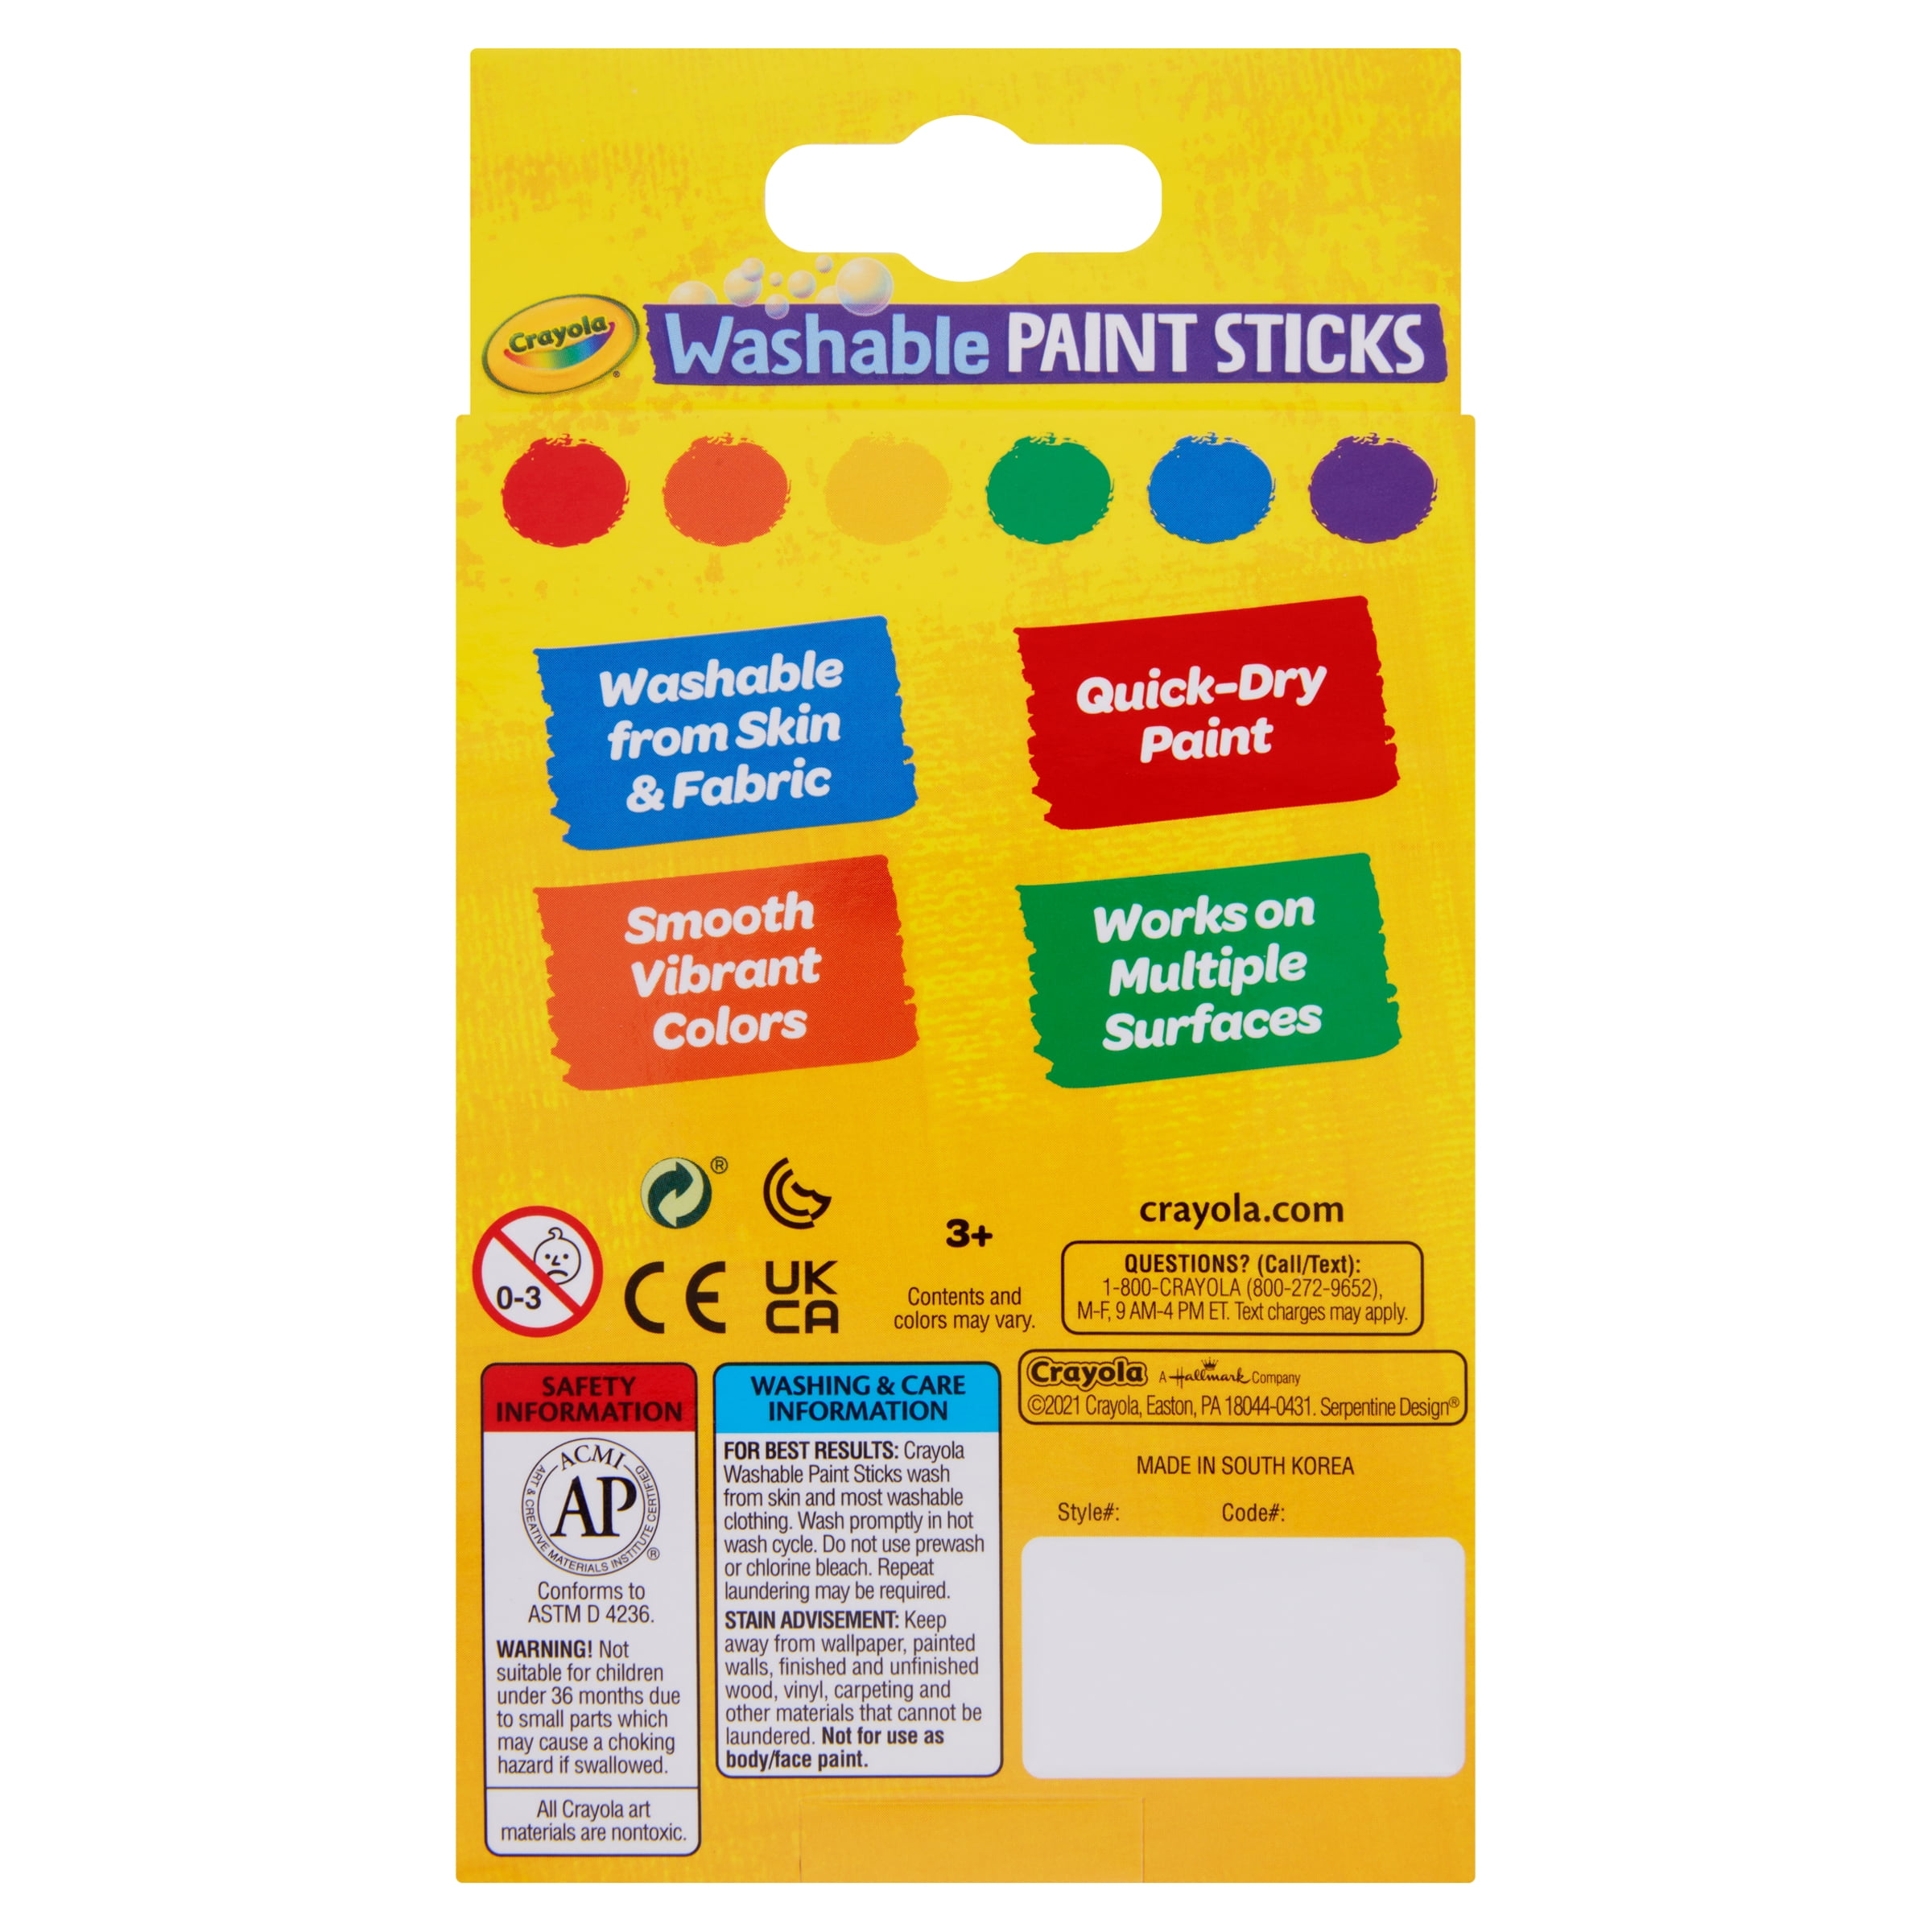 Playkidiz Paint Sticks, 6 Pack, Classic Colors, Twistable Crayon Paint  Sticks, Mess-Free Tempera & Poster Paint, Quick Drying, Great Birthday  Gift, Ages 3+ - Toys 4 U